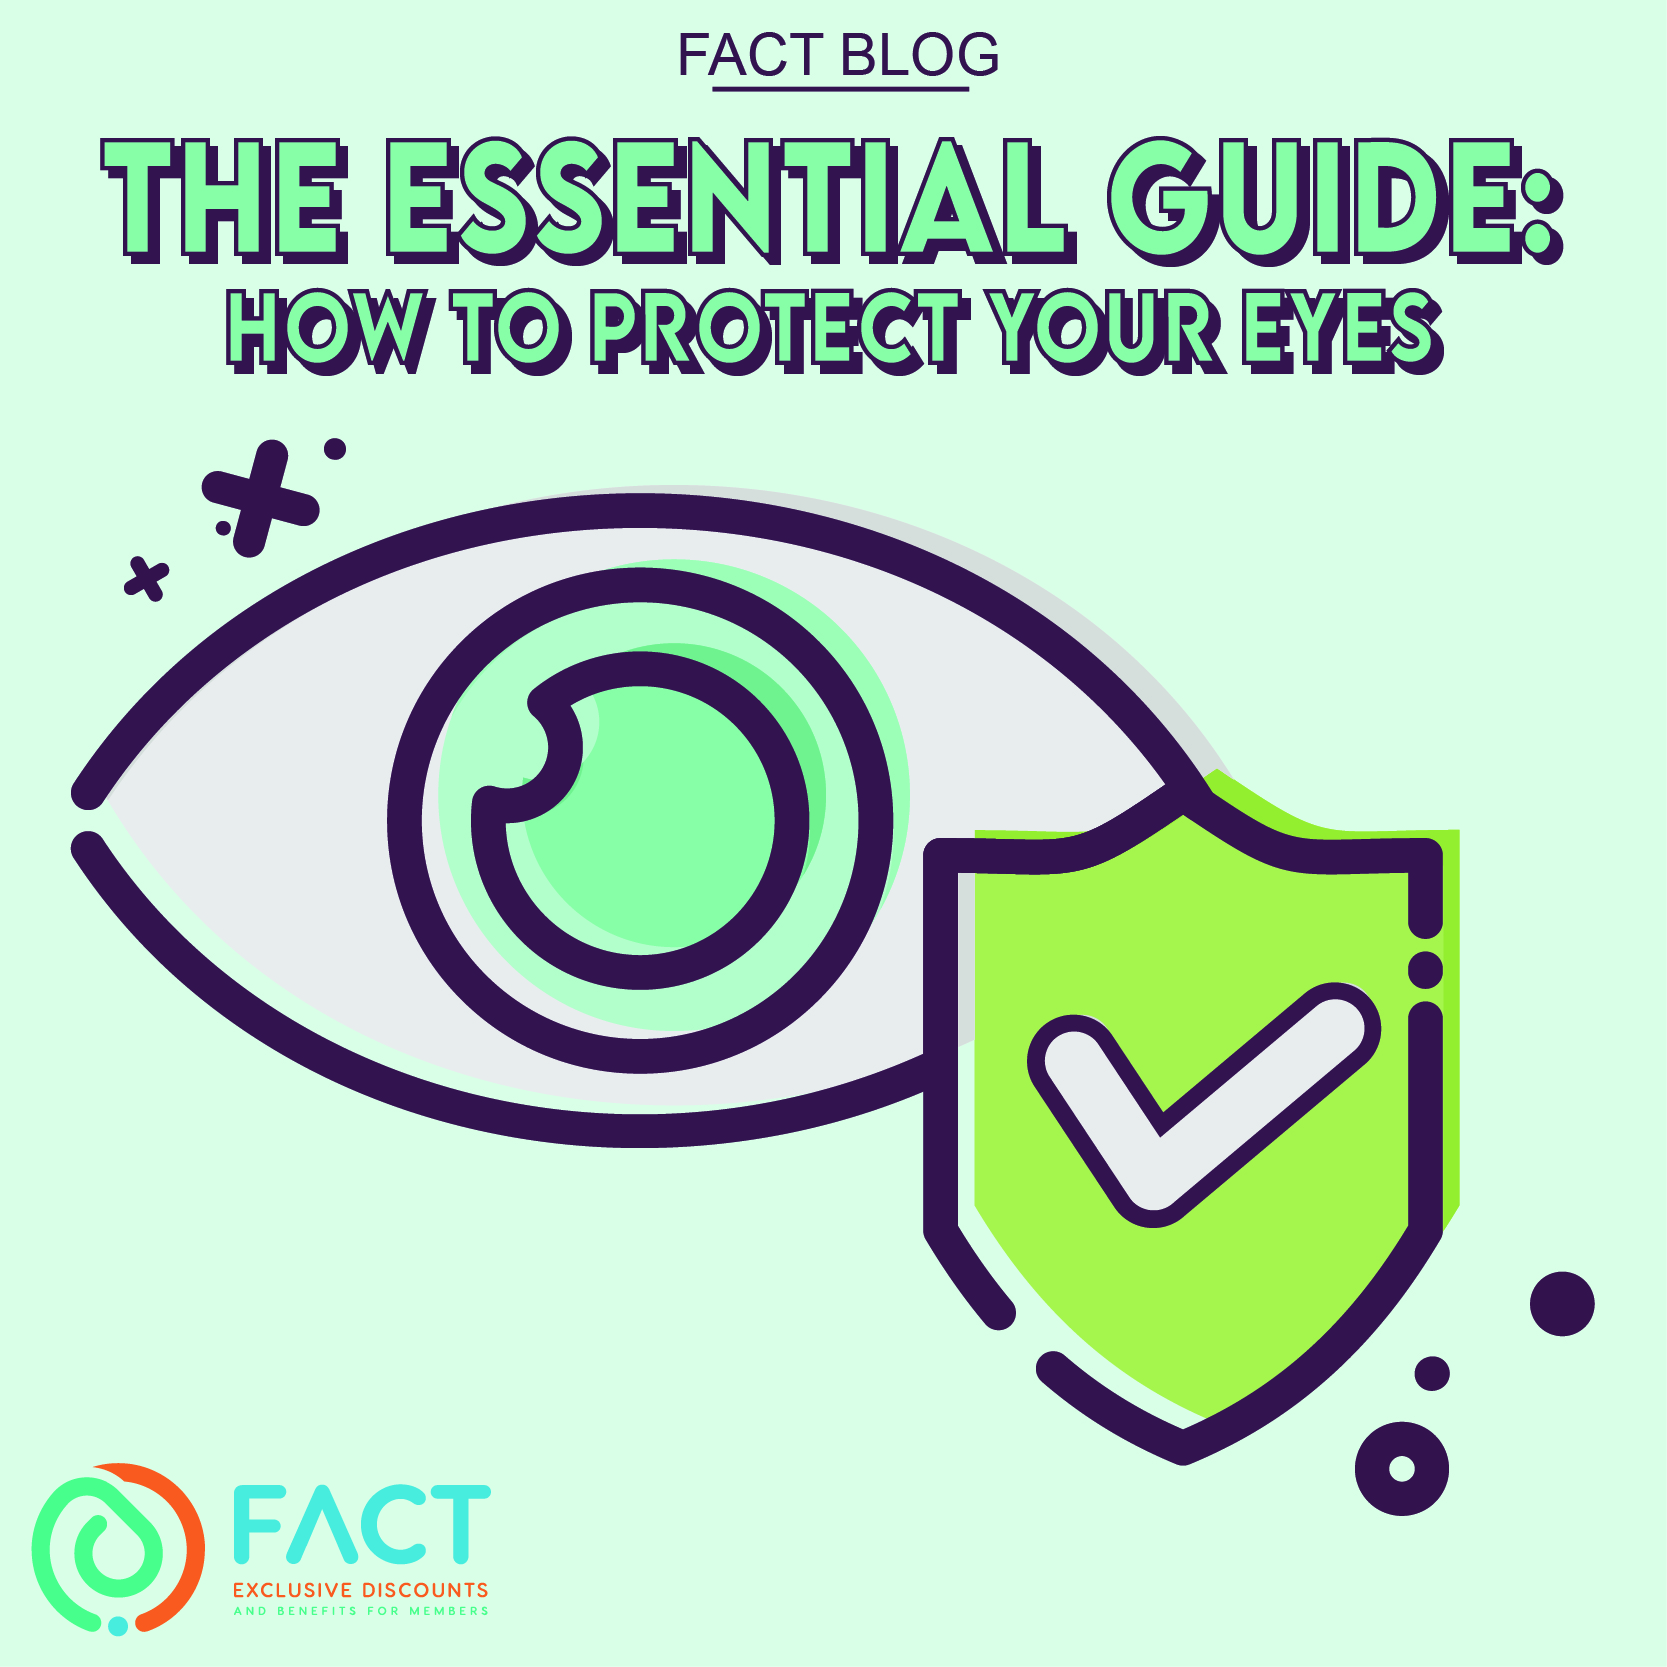 The Essential Guide: How to Protect Your Eyes